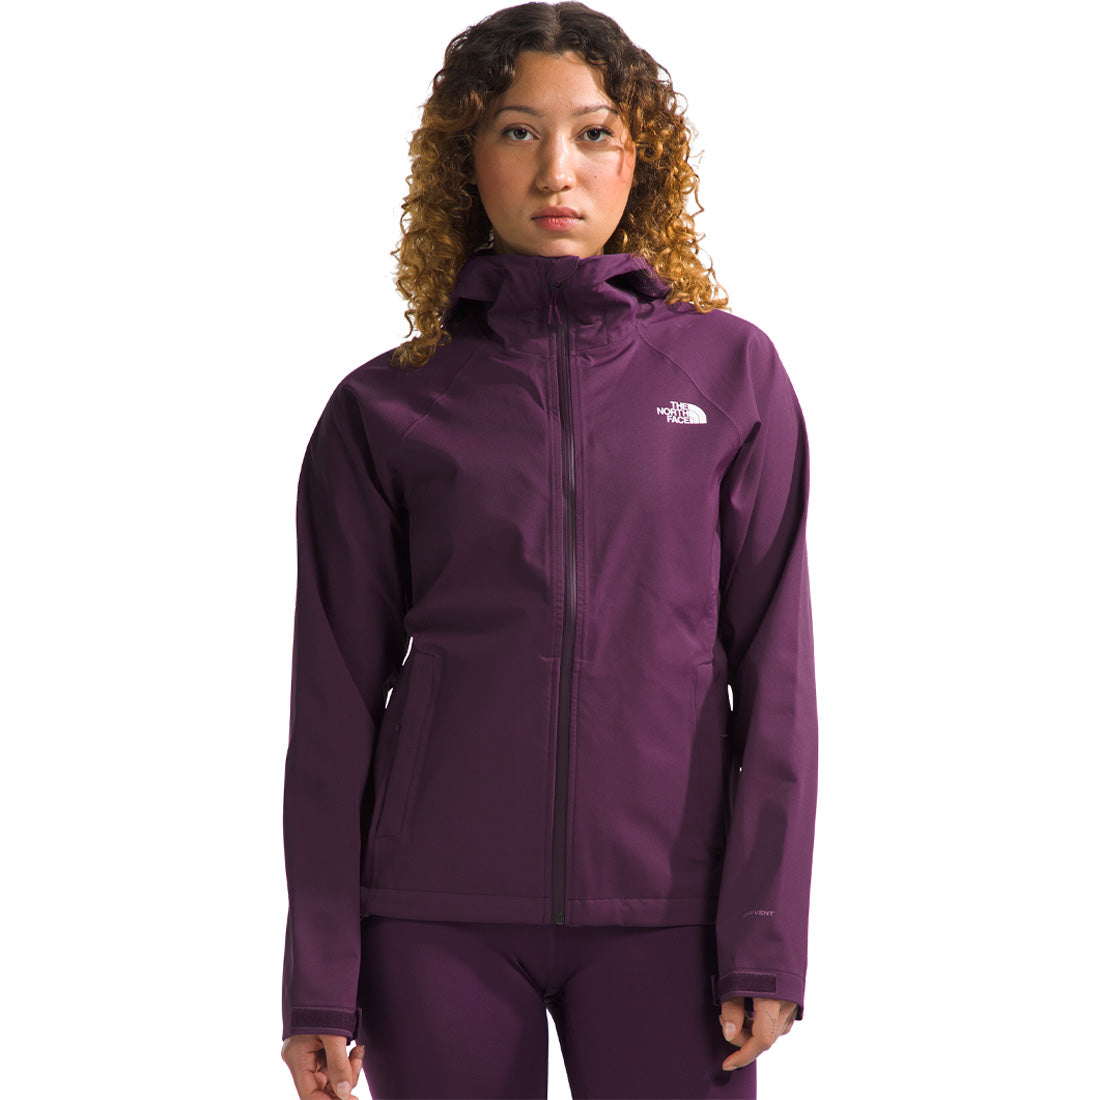 The North Face Valle Vista Stretch Jacket - Women's